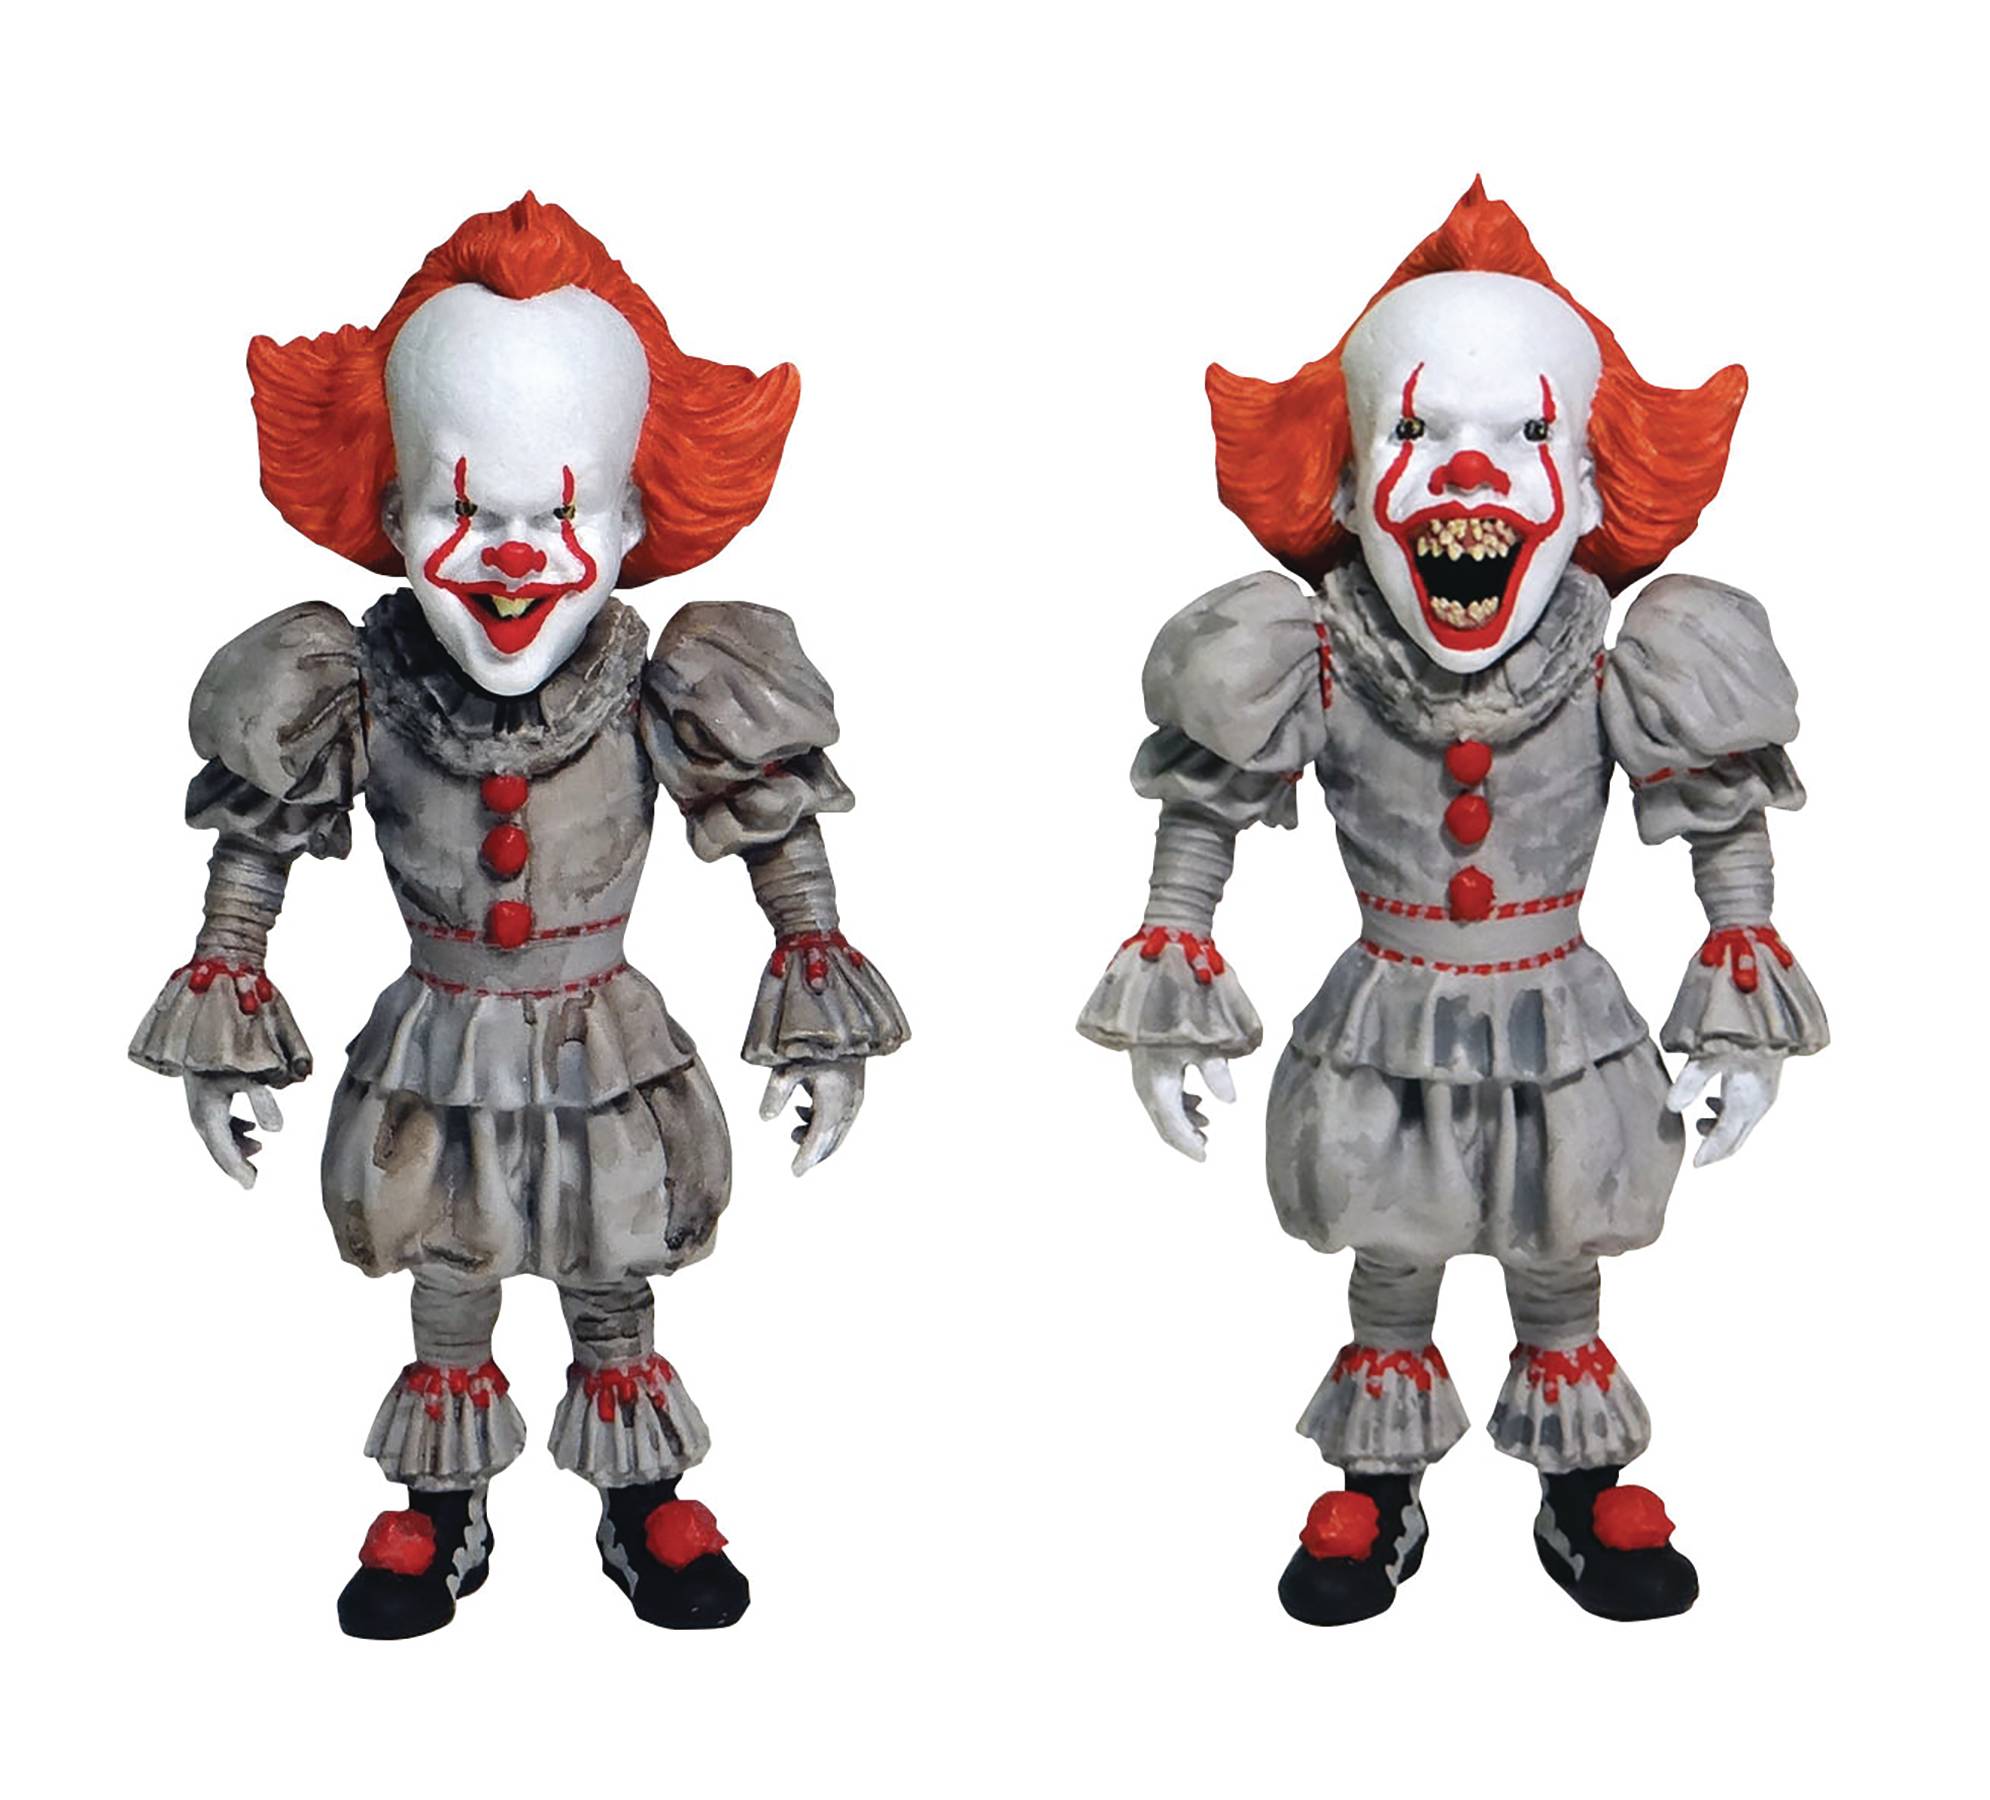 IT 2 MOVIE PENNYWISE D-FORMZ 2PK